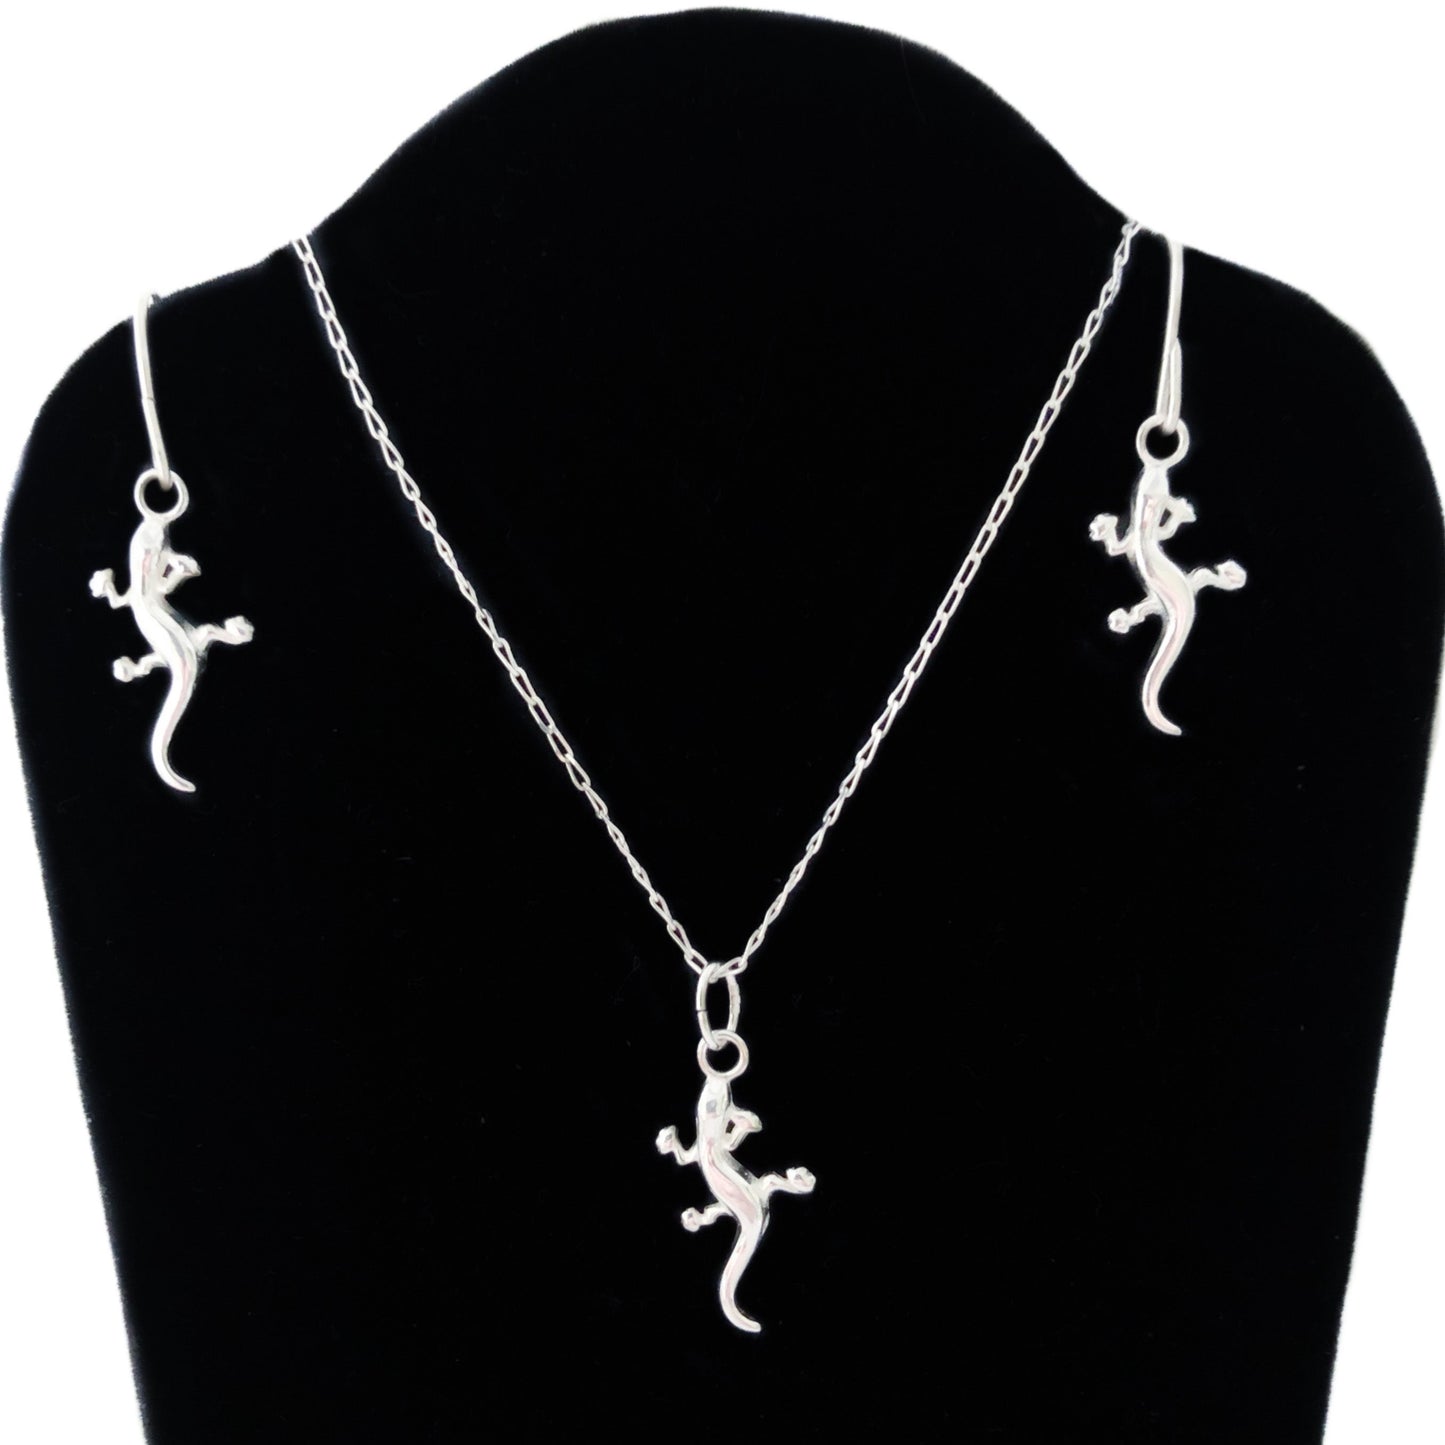 Mr Gecko Silver Charm Necklace